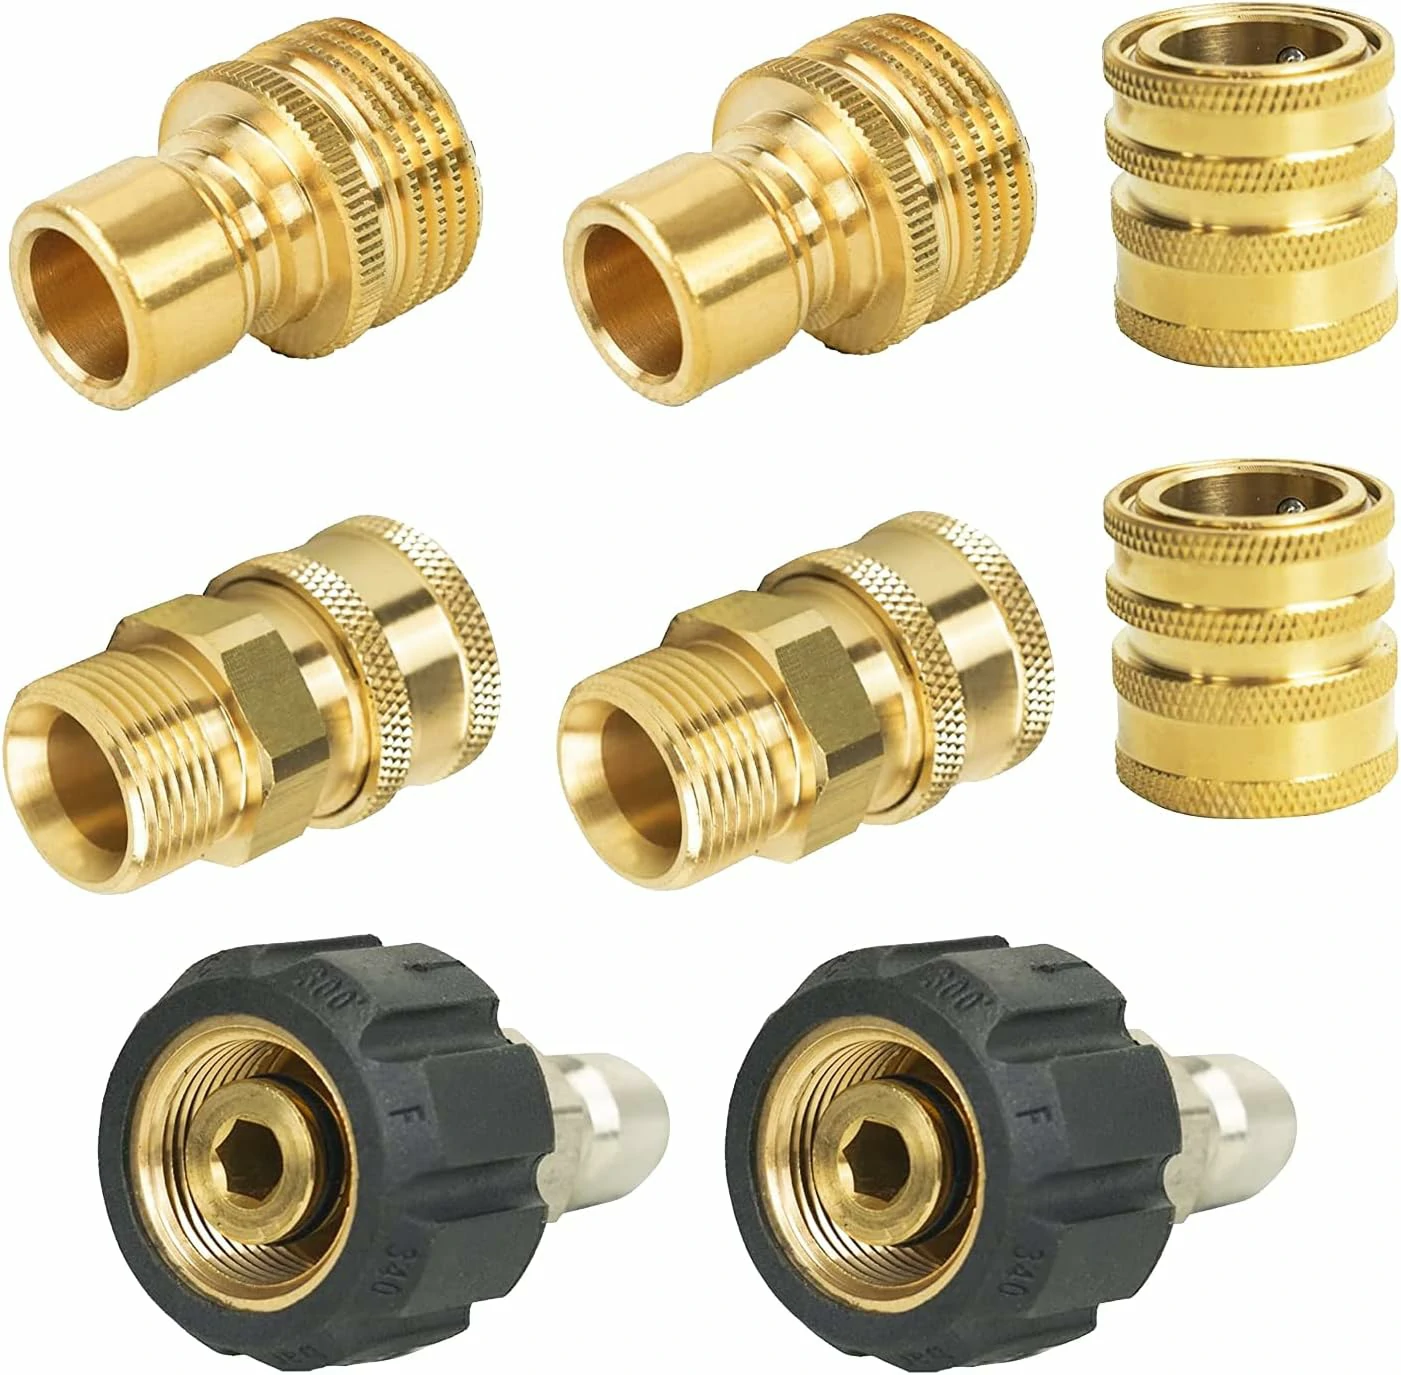 EVEAGE Pressure Washer Adapter Set